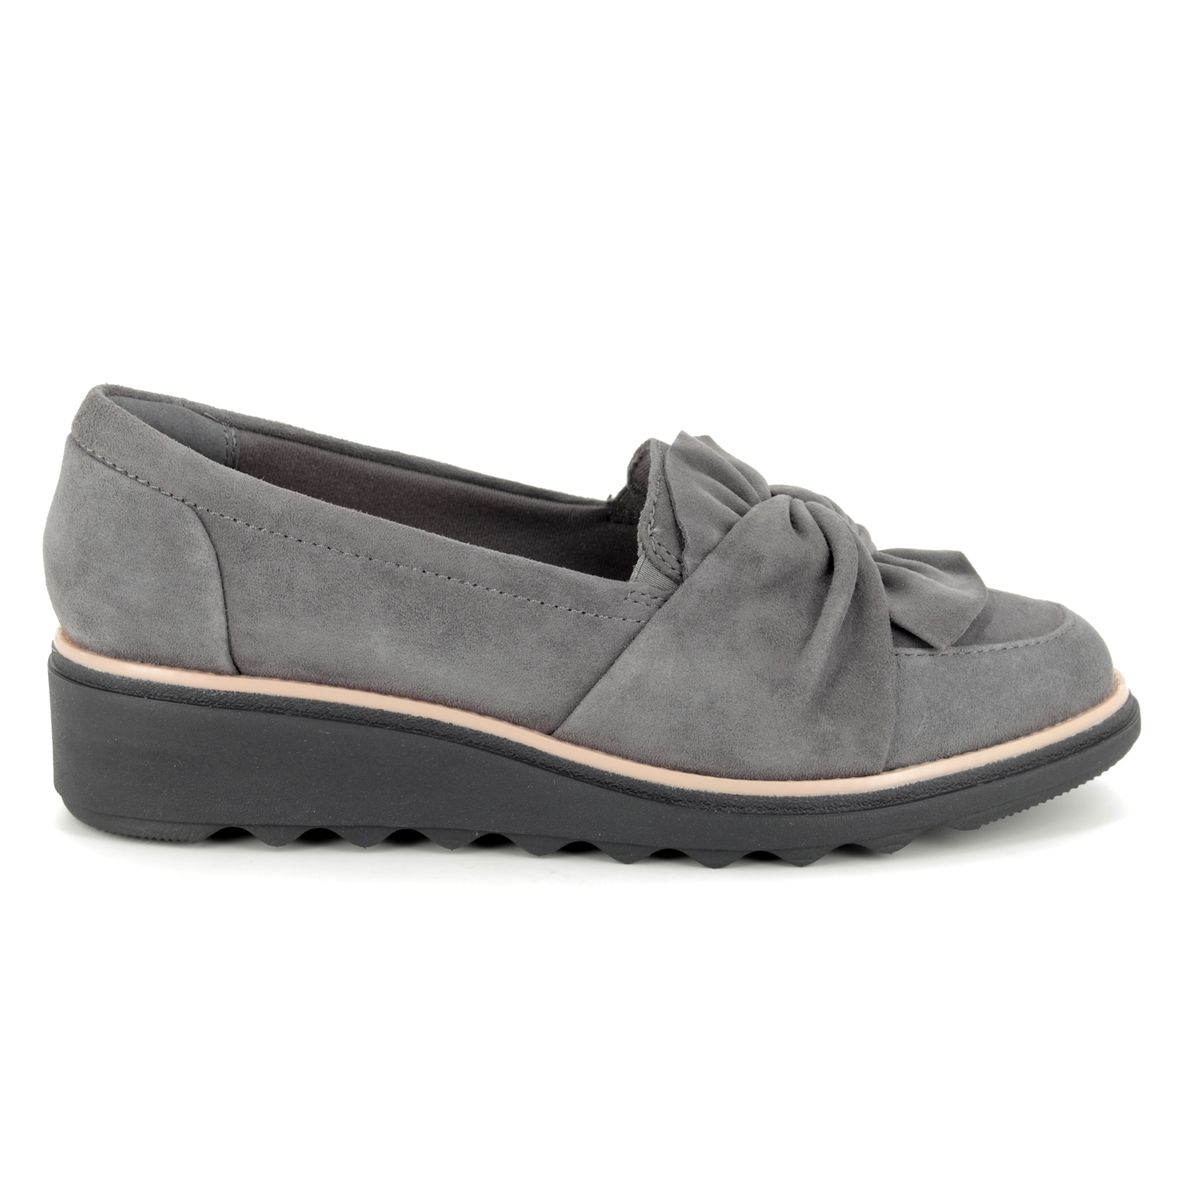 clarks sharon dasher shoes